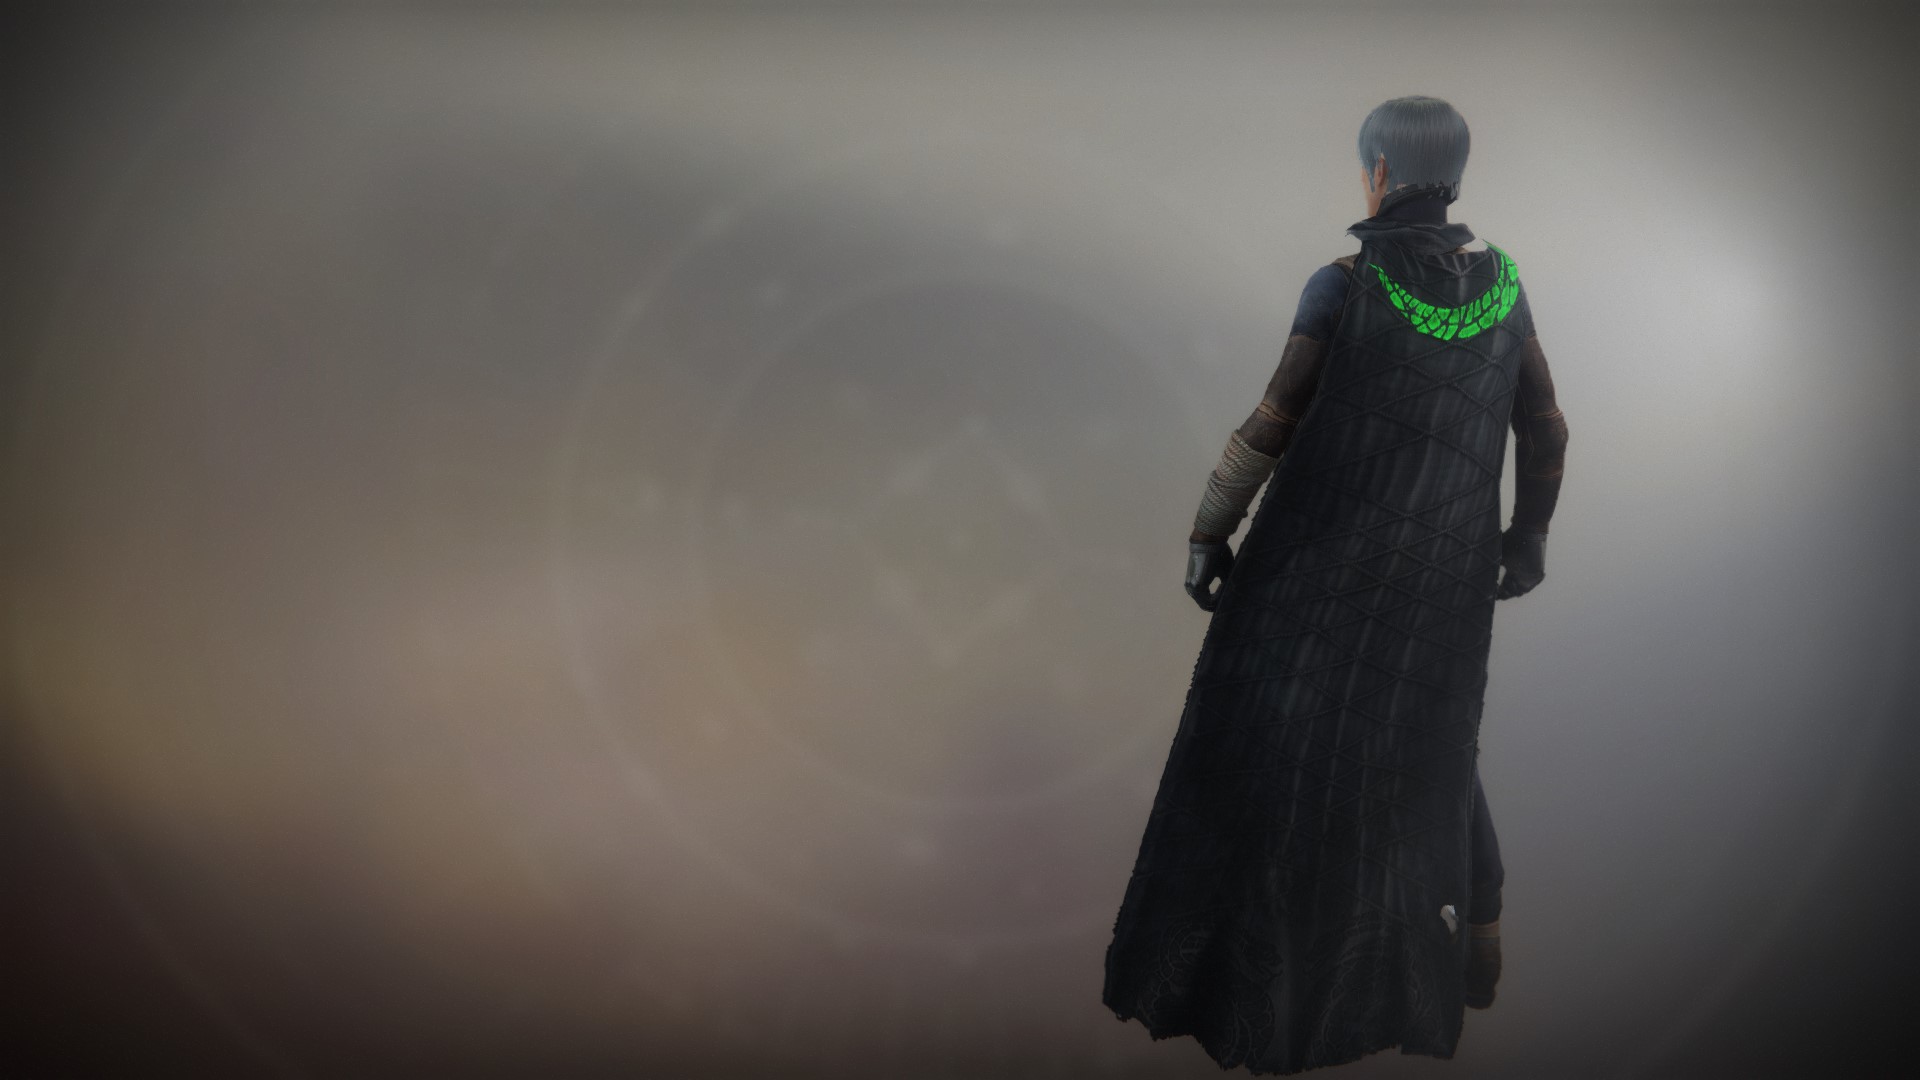 An in-game render of the Outlawed Reaper Cloak.